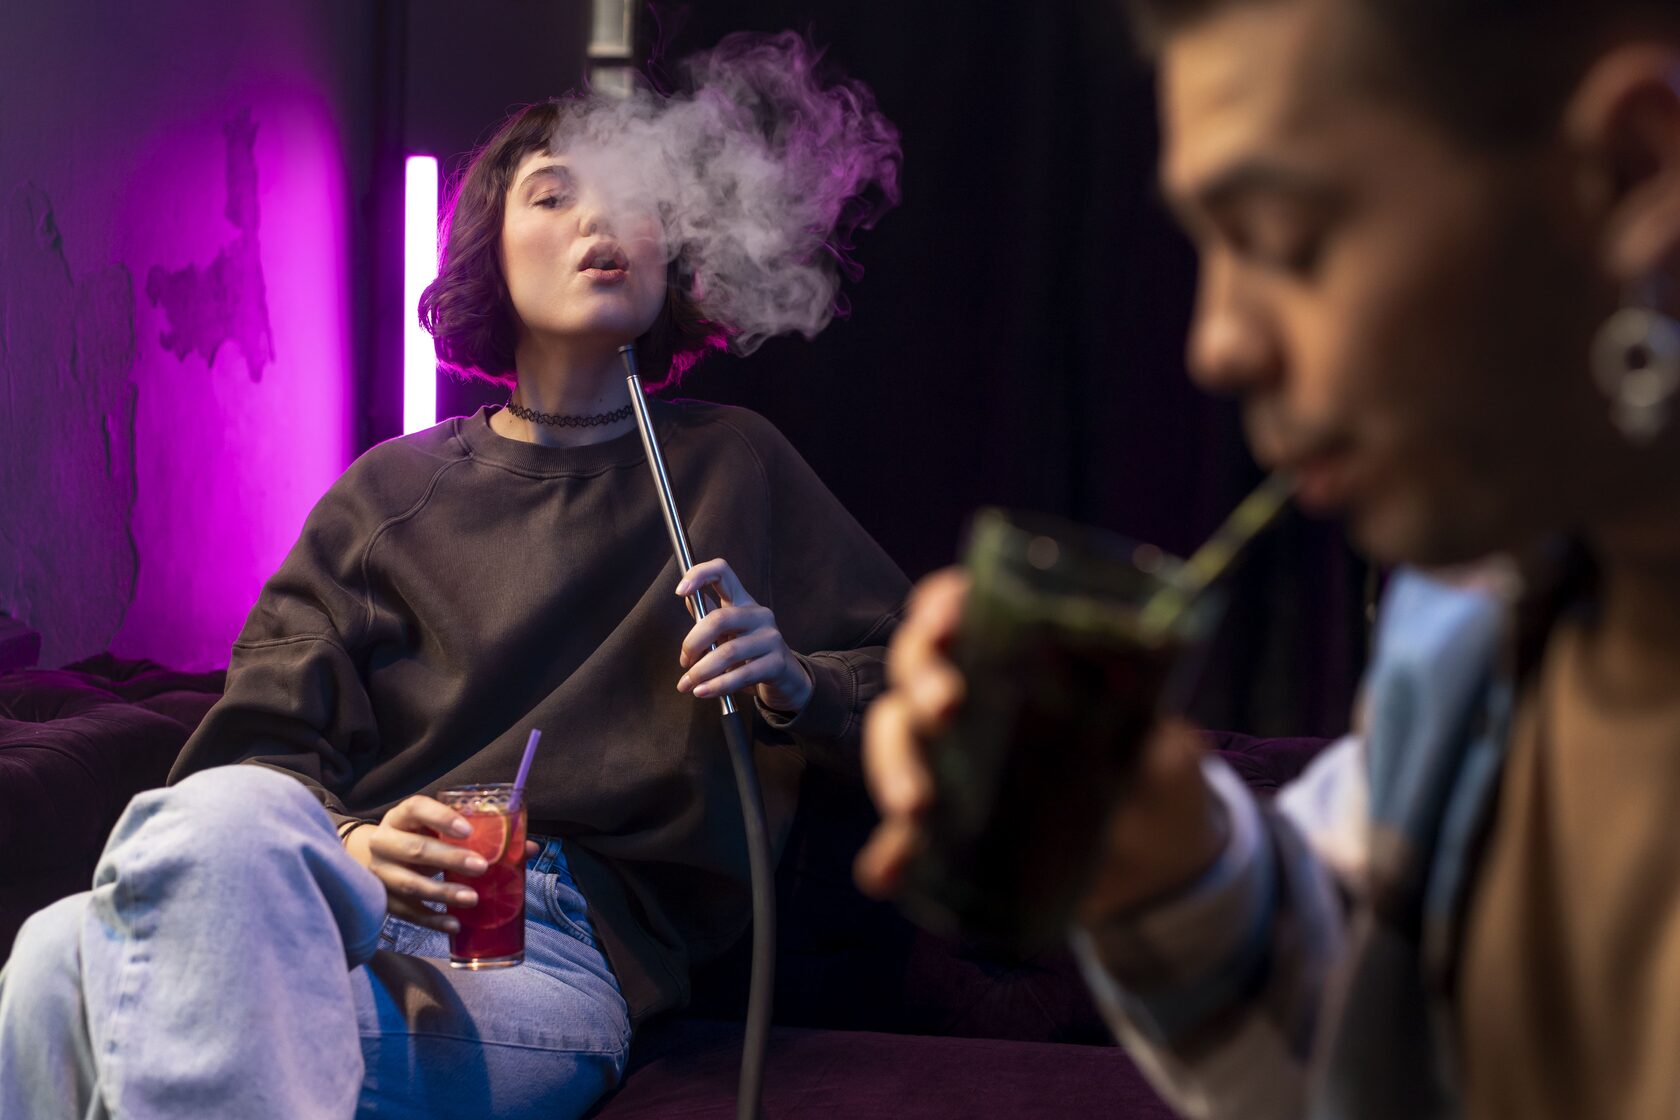 A girl smoking a hookah in a relaxed setting, focusing on her calm expression and gracefully released smoke